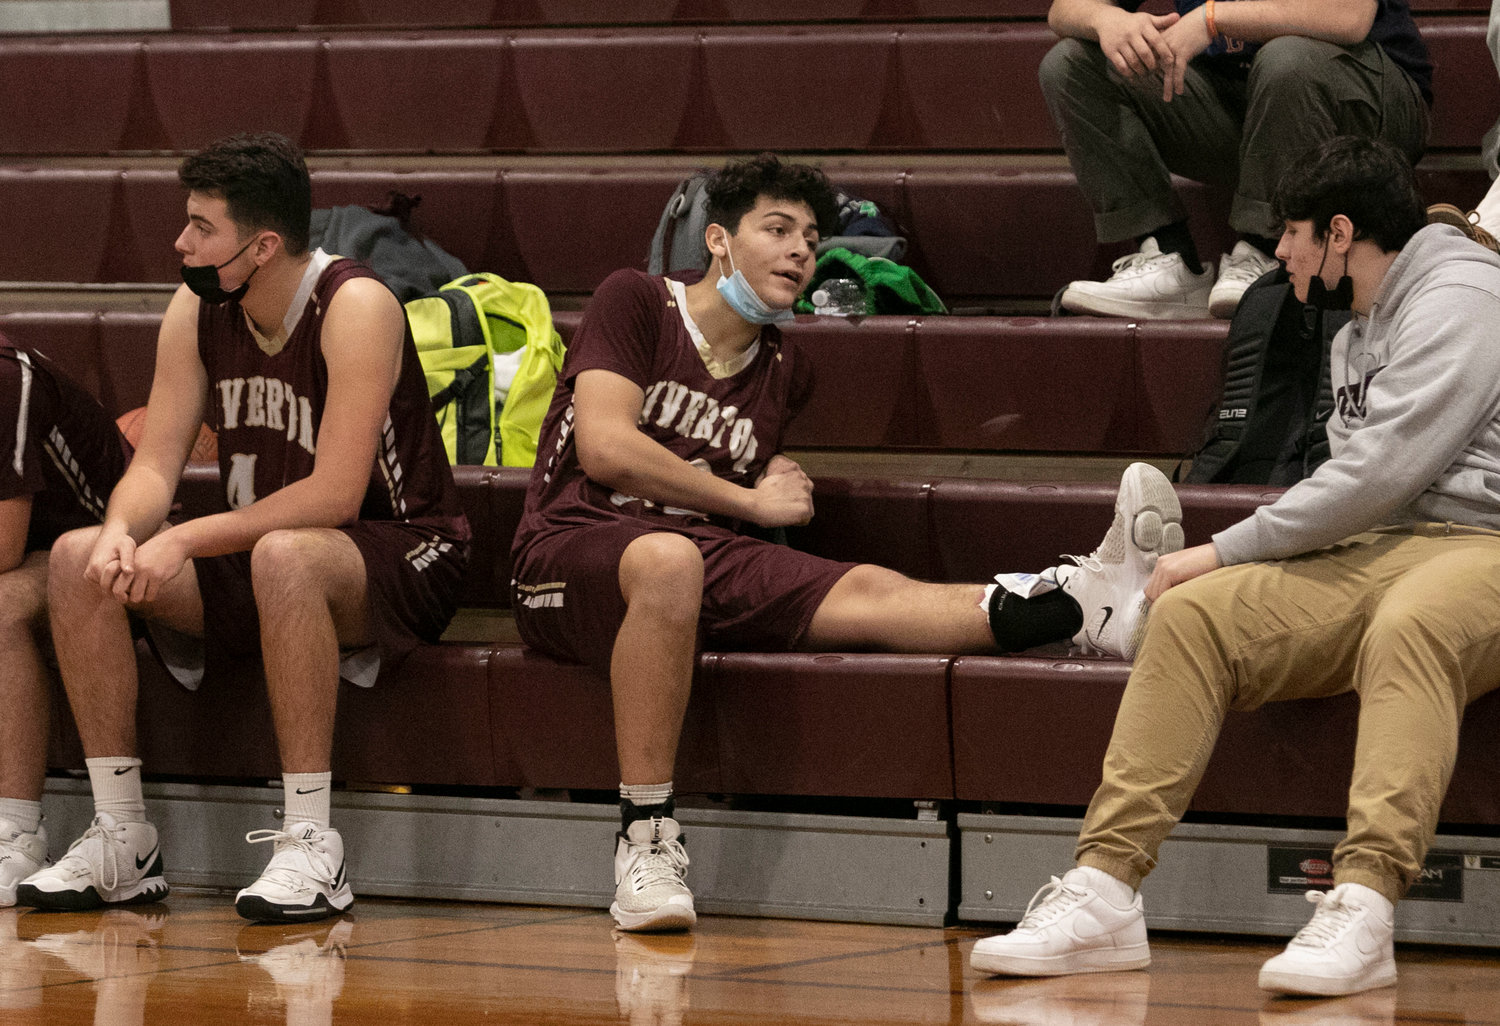 Nate Sama relaxes after spraining his ankle in the first quarter. 
Tigers Tristan White (left), Keegan Dutelle and Luke Deldeo thwart Widlcats forward Jayden Zuber as he attempts a layup in the first half. 